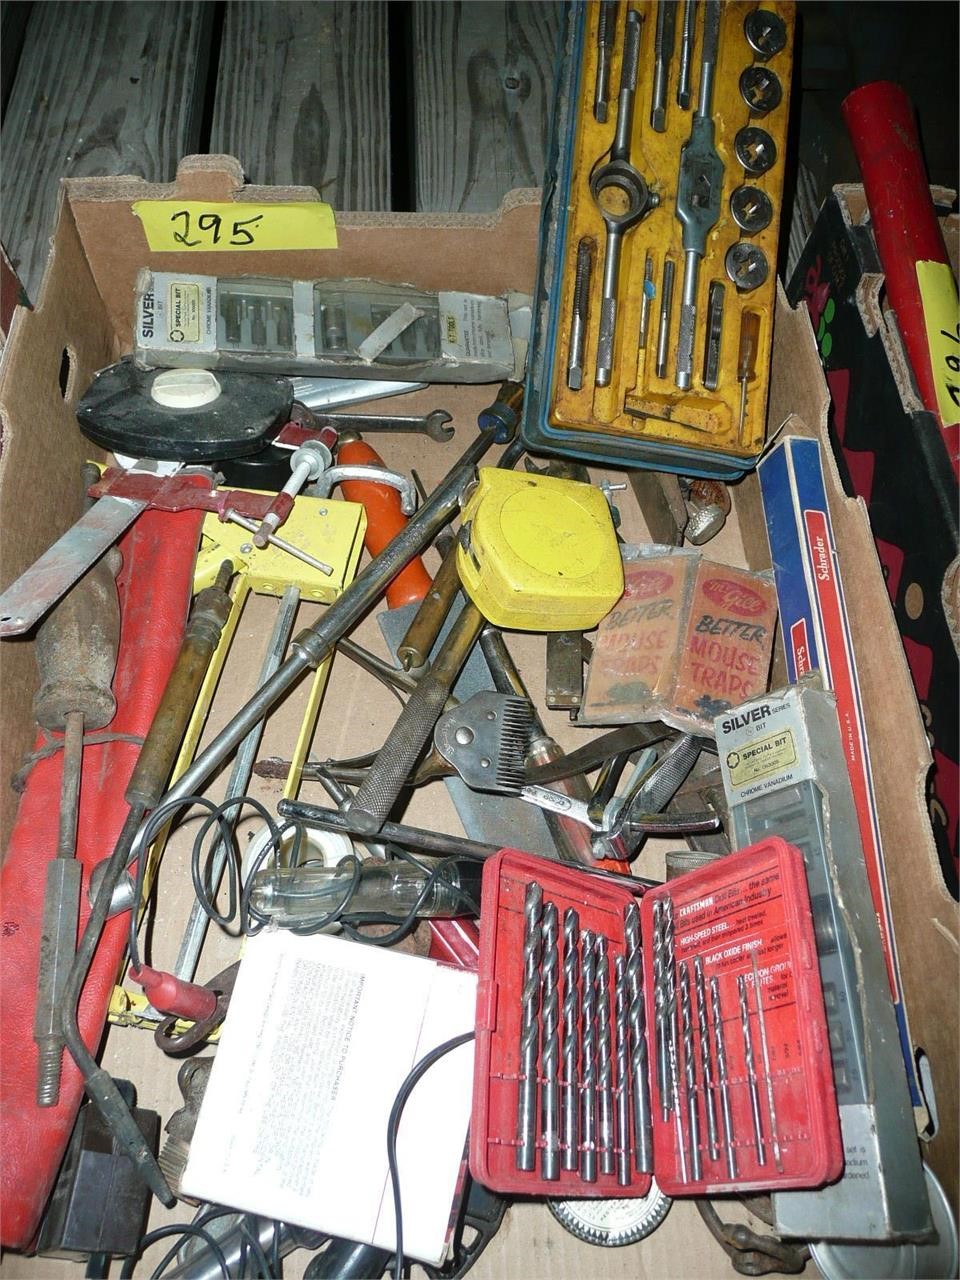 Box of Tools, Drill Bits, Tap and Die